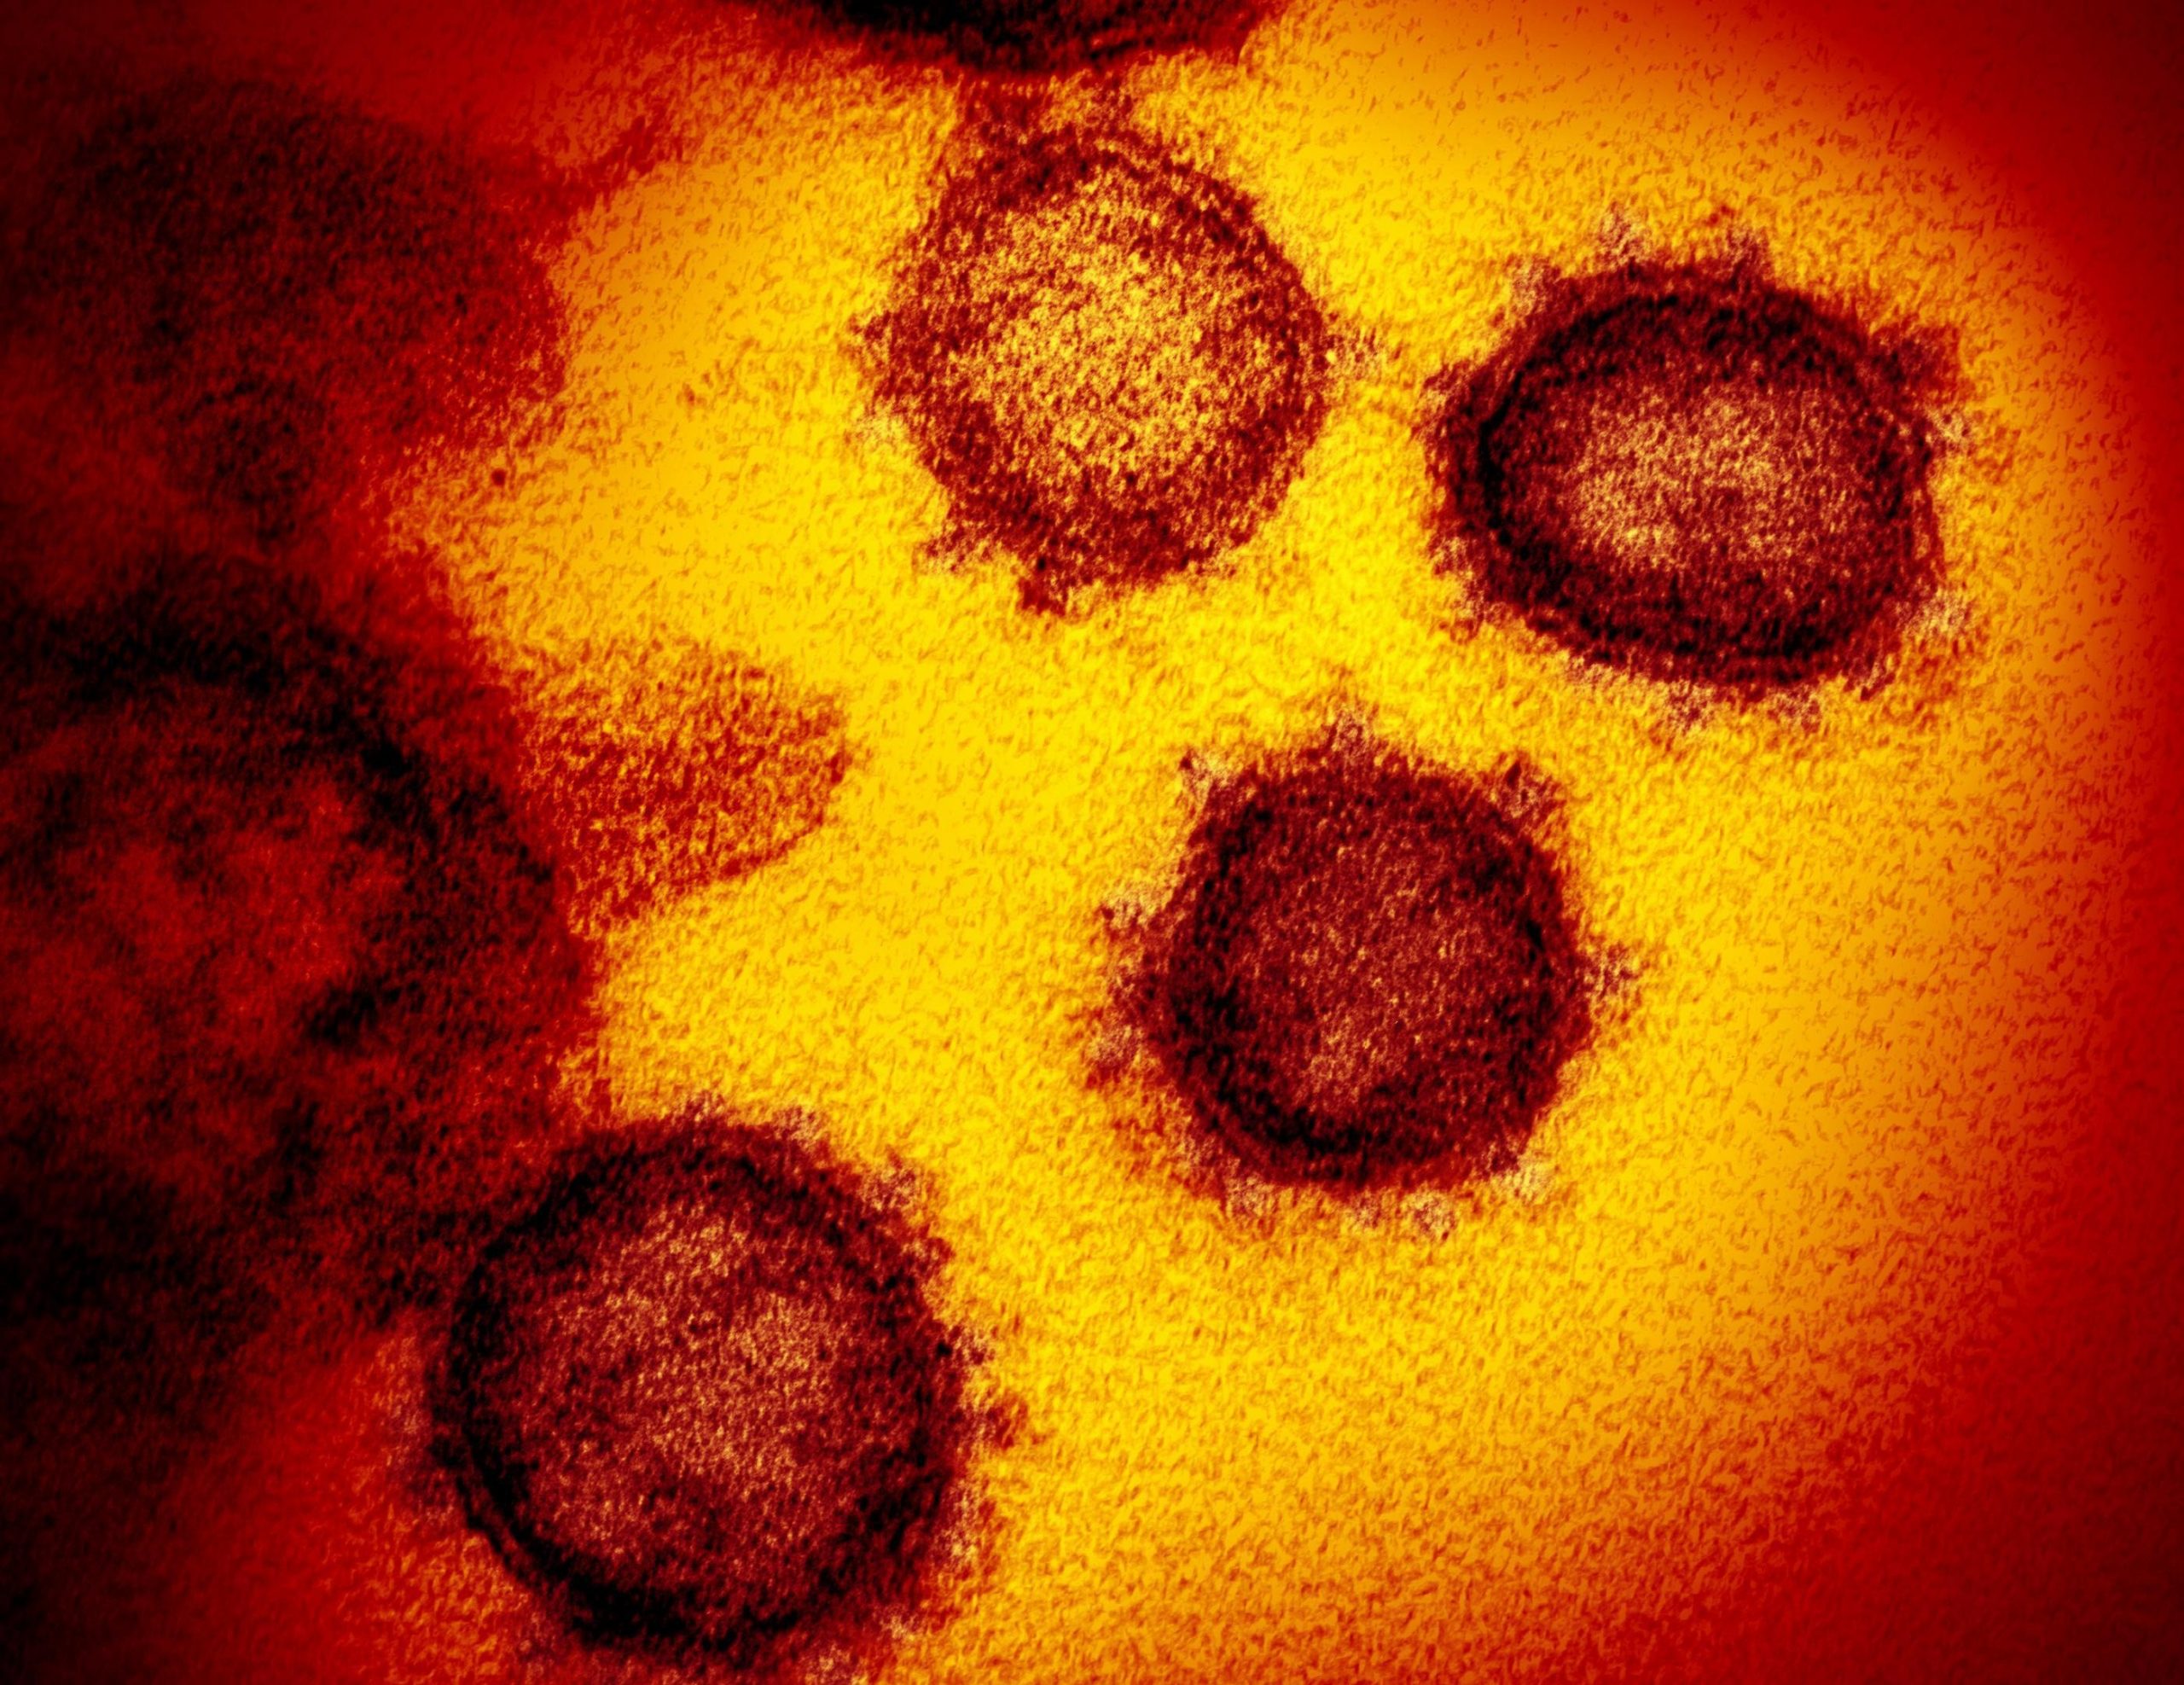 New coronavirus circulates undetected months before first COVID-19 cases discovered in Wuhan, China